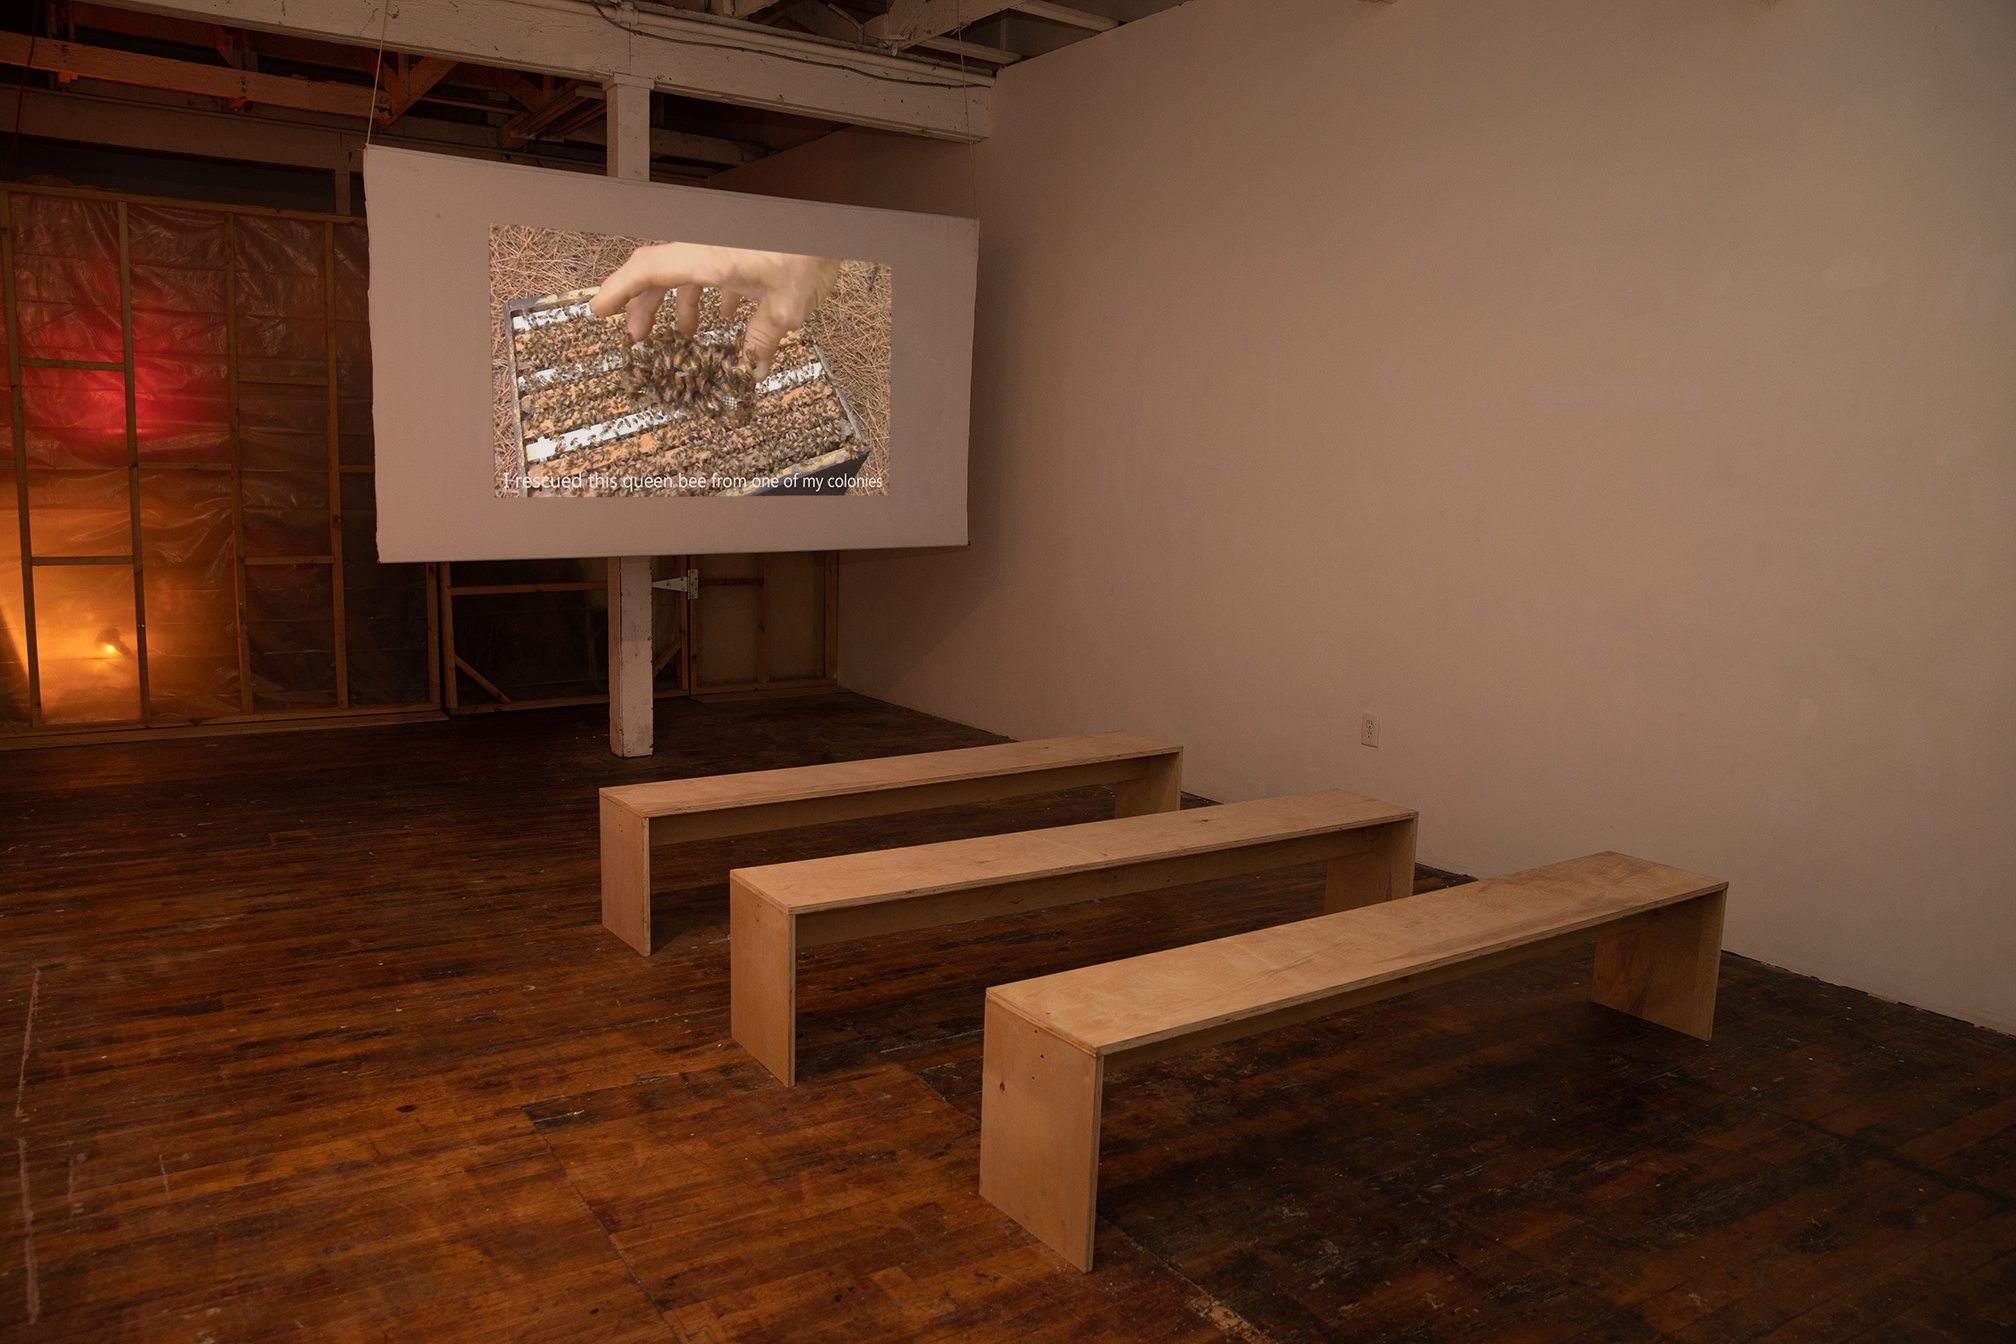 3/4 view of a projection screen with three wooden benches for seating in front in a room with warm lighting